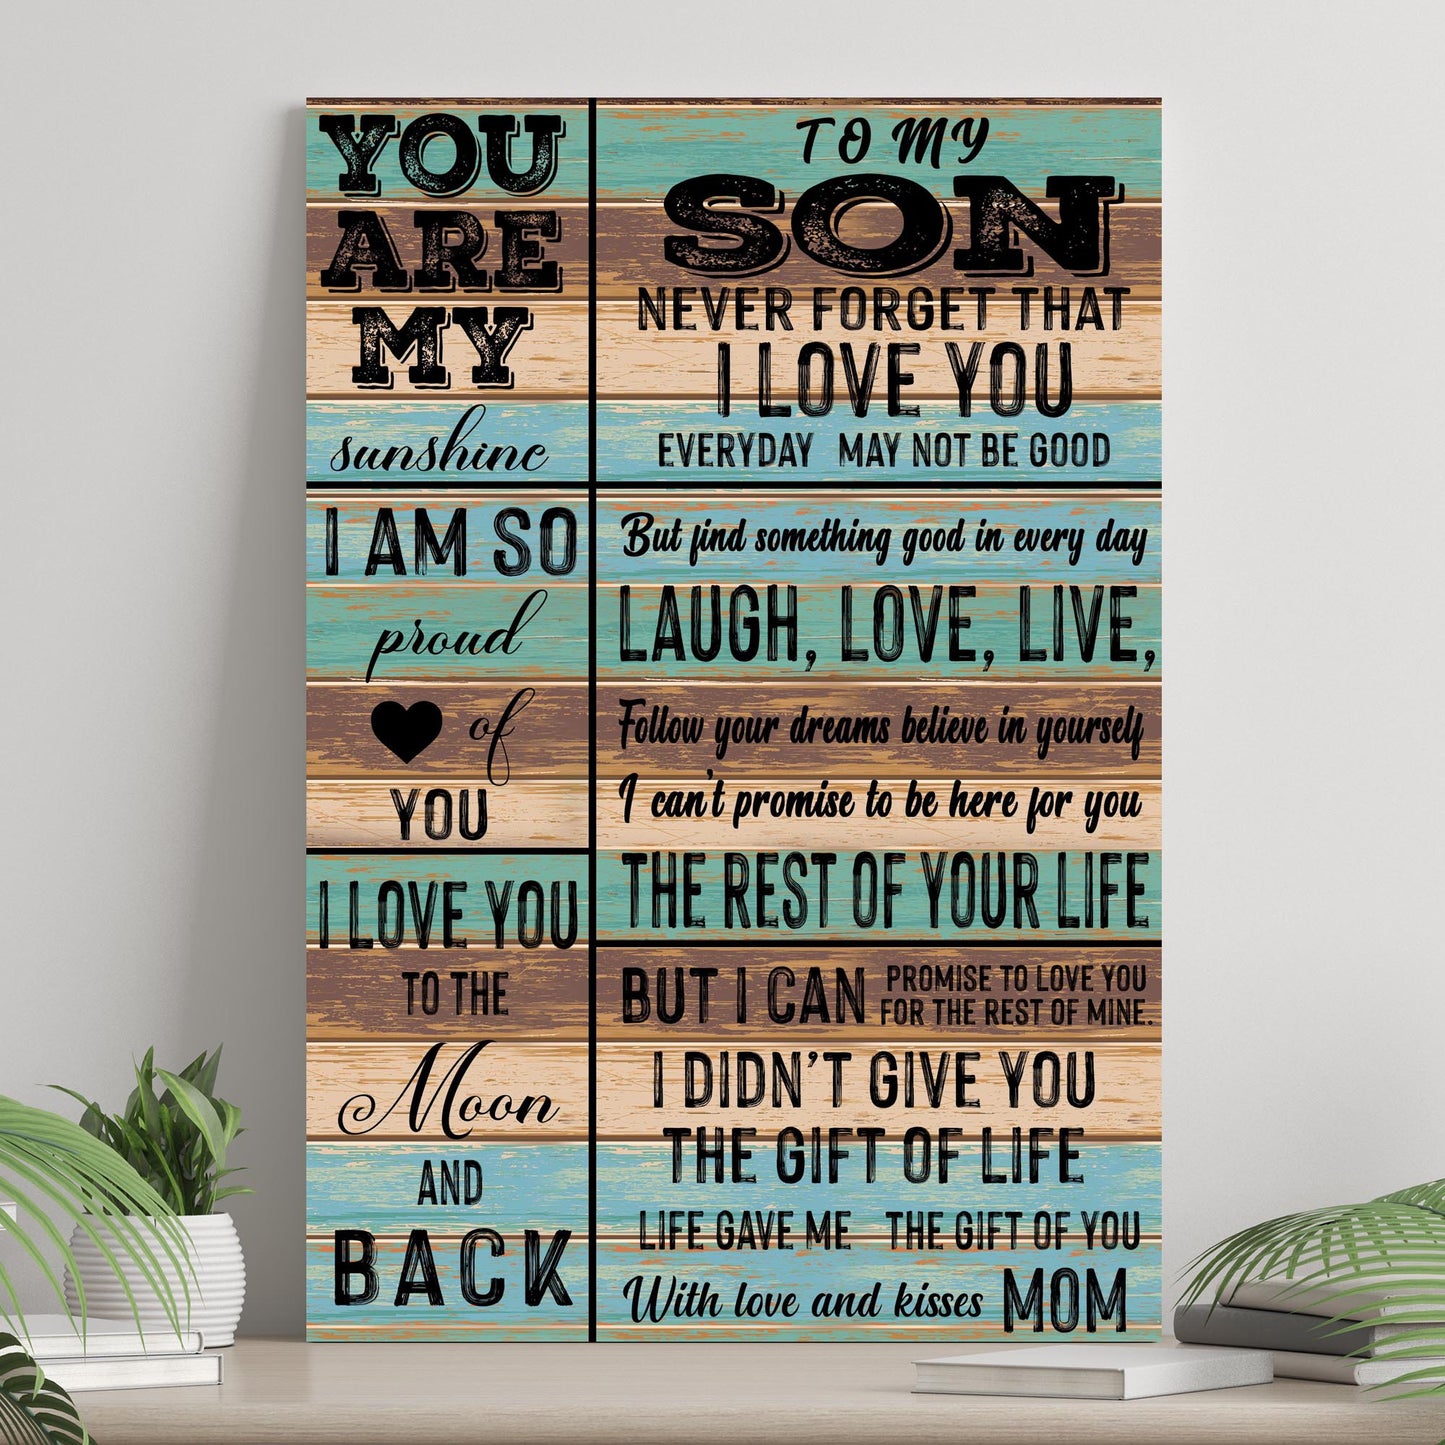 To My Son Sign - Image by Tailored Canvases